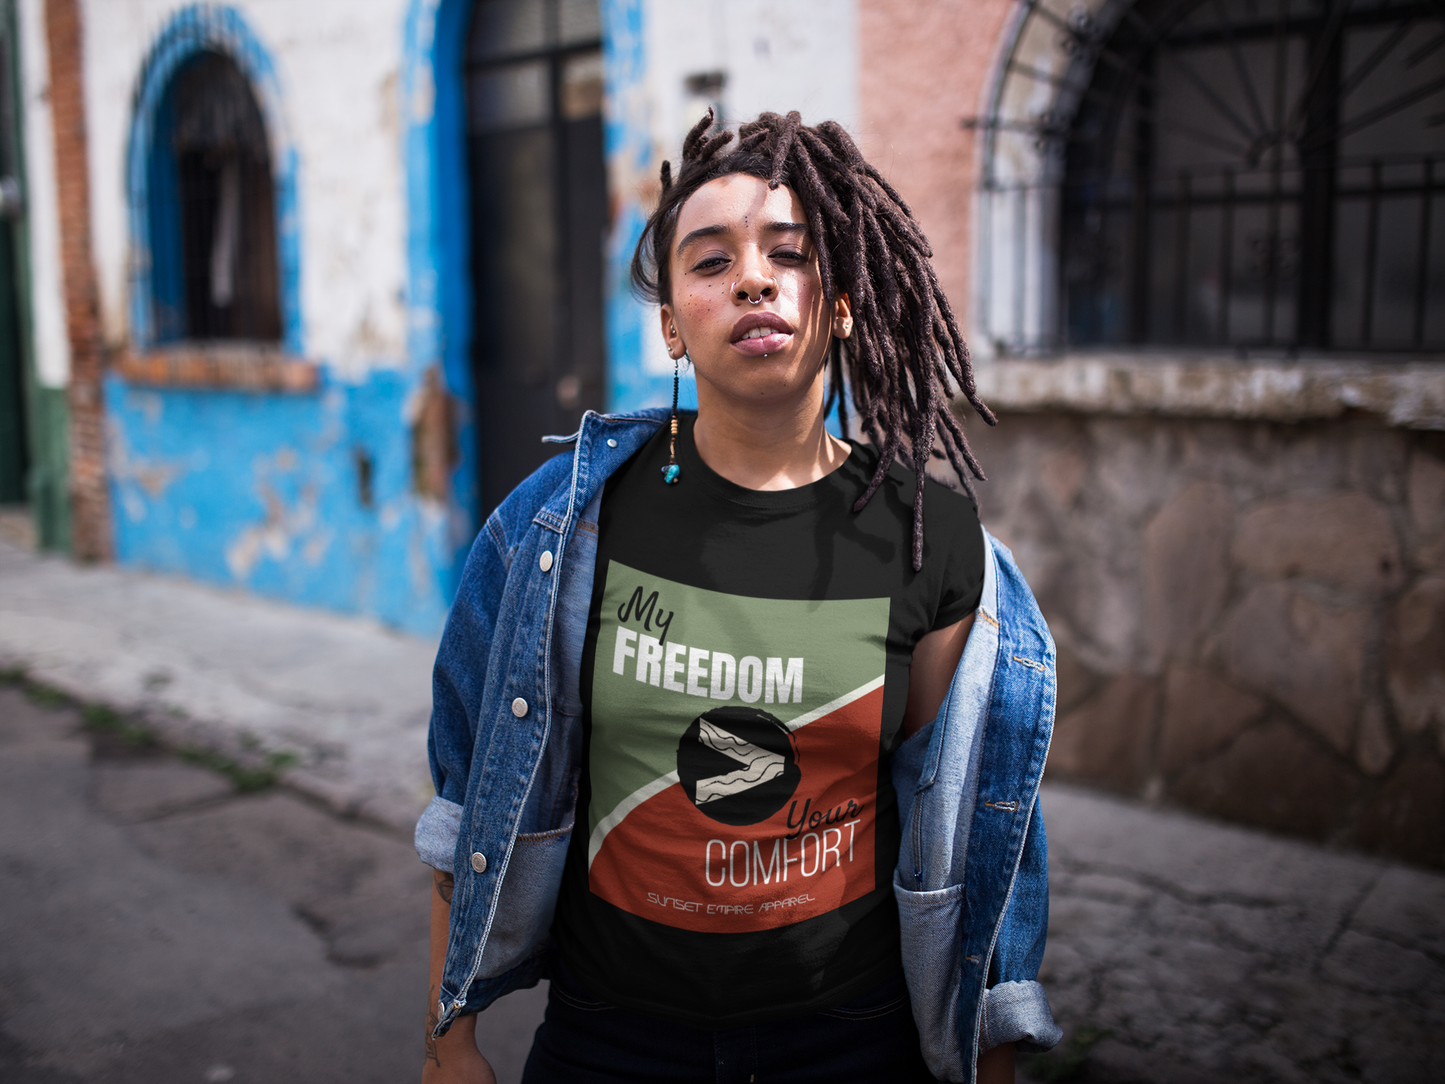 My Freedom over Your Comfort Short-Sleeve Unisex T-Shirt